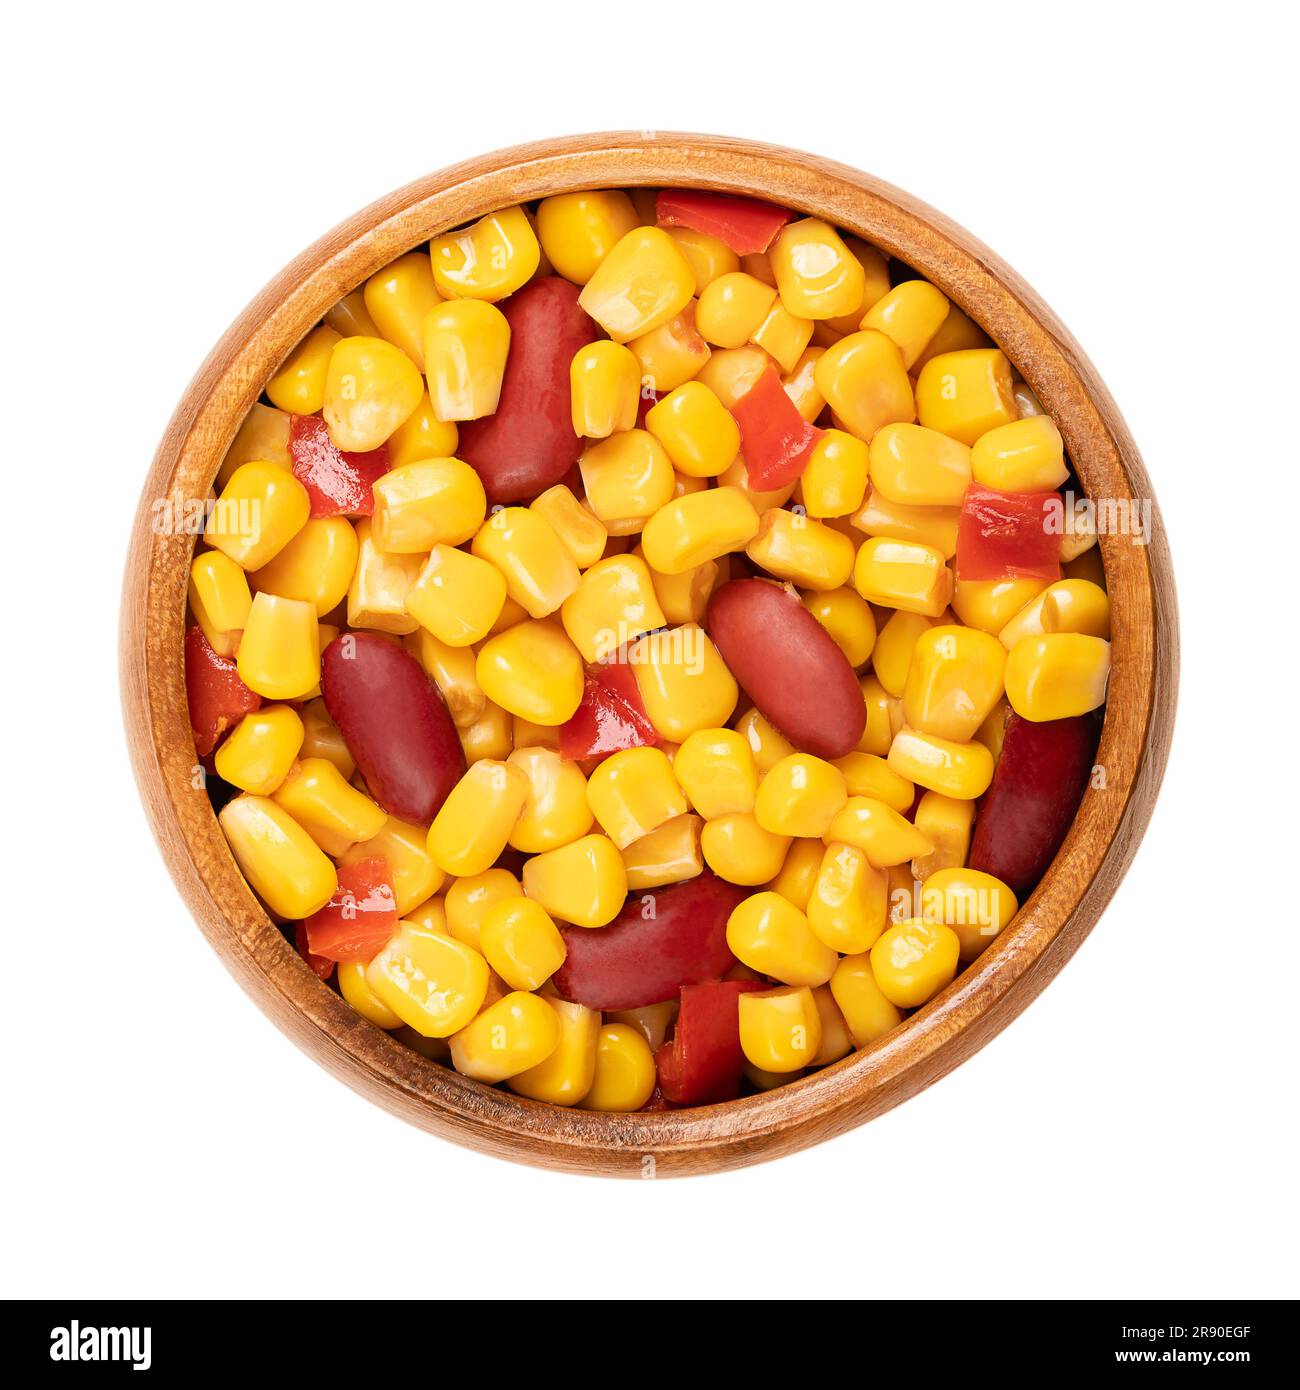 Mix of canned corn, red kidney beans and diced bell pepper, in a wooden bowl. Ready to eat Texas maize mix, as a side dish to a barbecue. Stock Photo